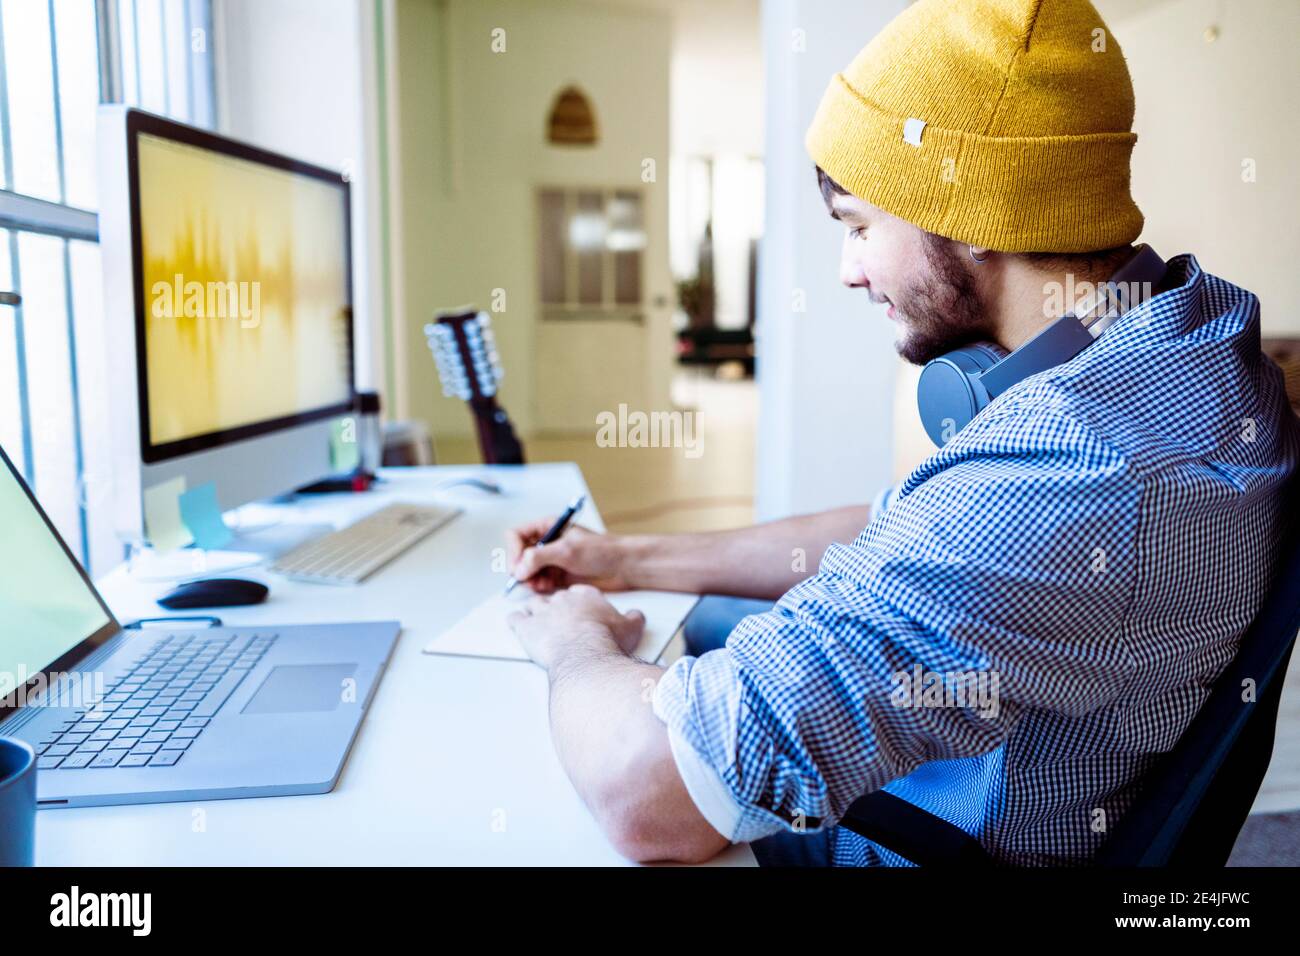 Composer wearing knit hat writing while working at studio Stock Photo